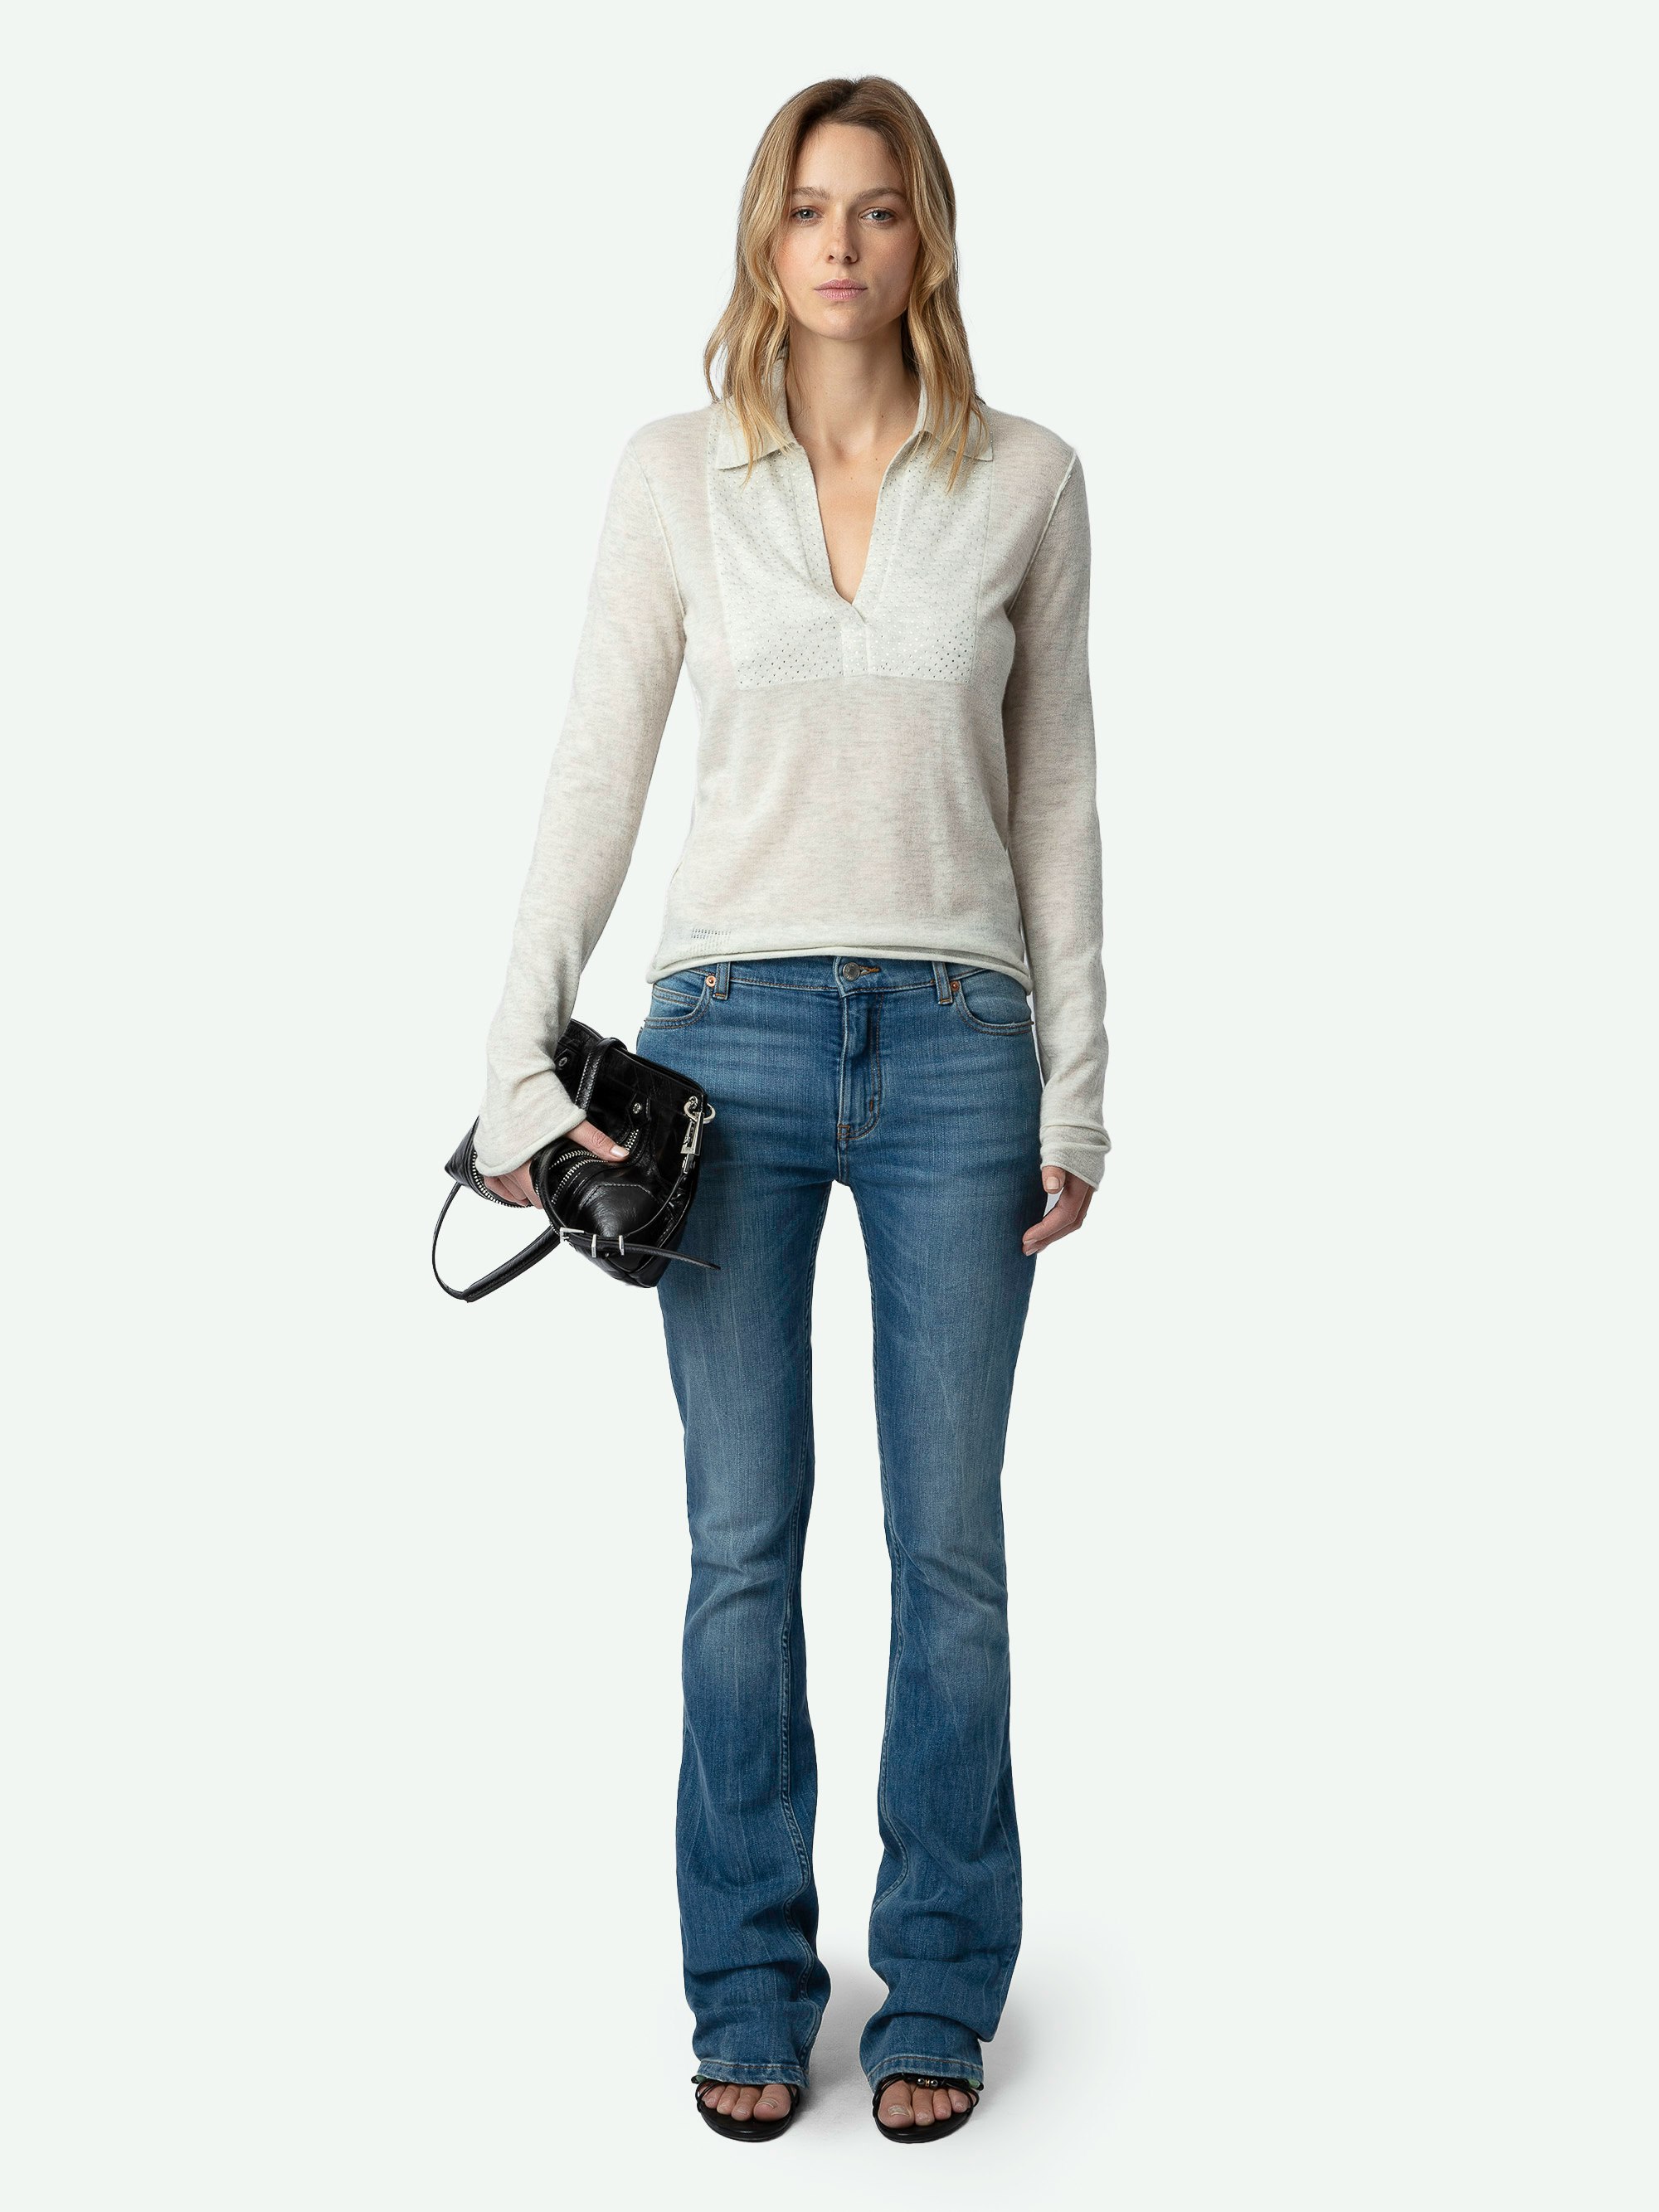 Sally Diamante Cashmere Sweater - Long-sleeved feather cashmere sweater with polo V-neck and diamante-embellished front panel.